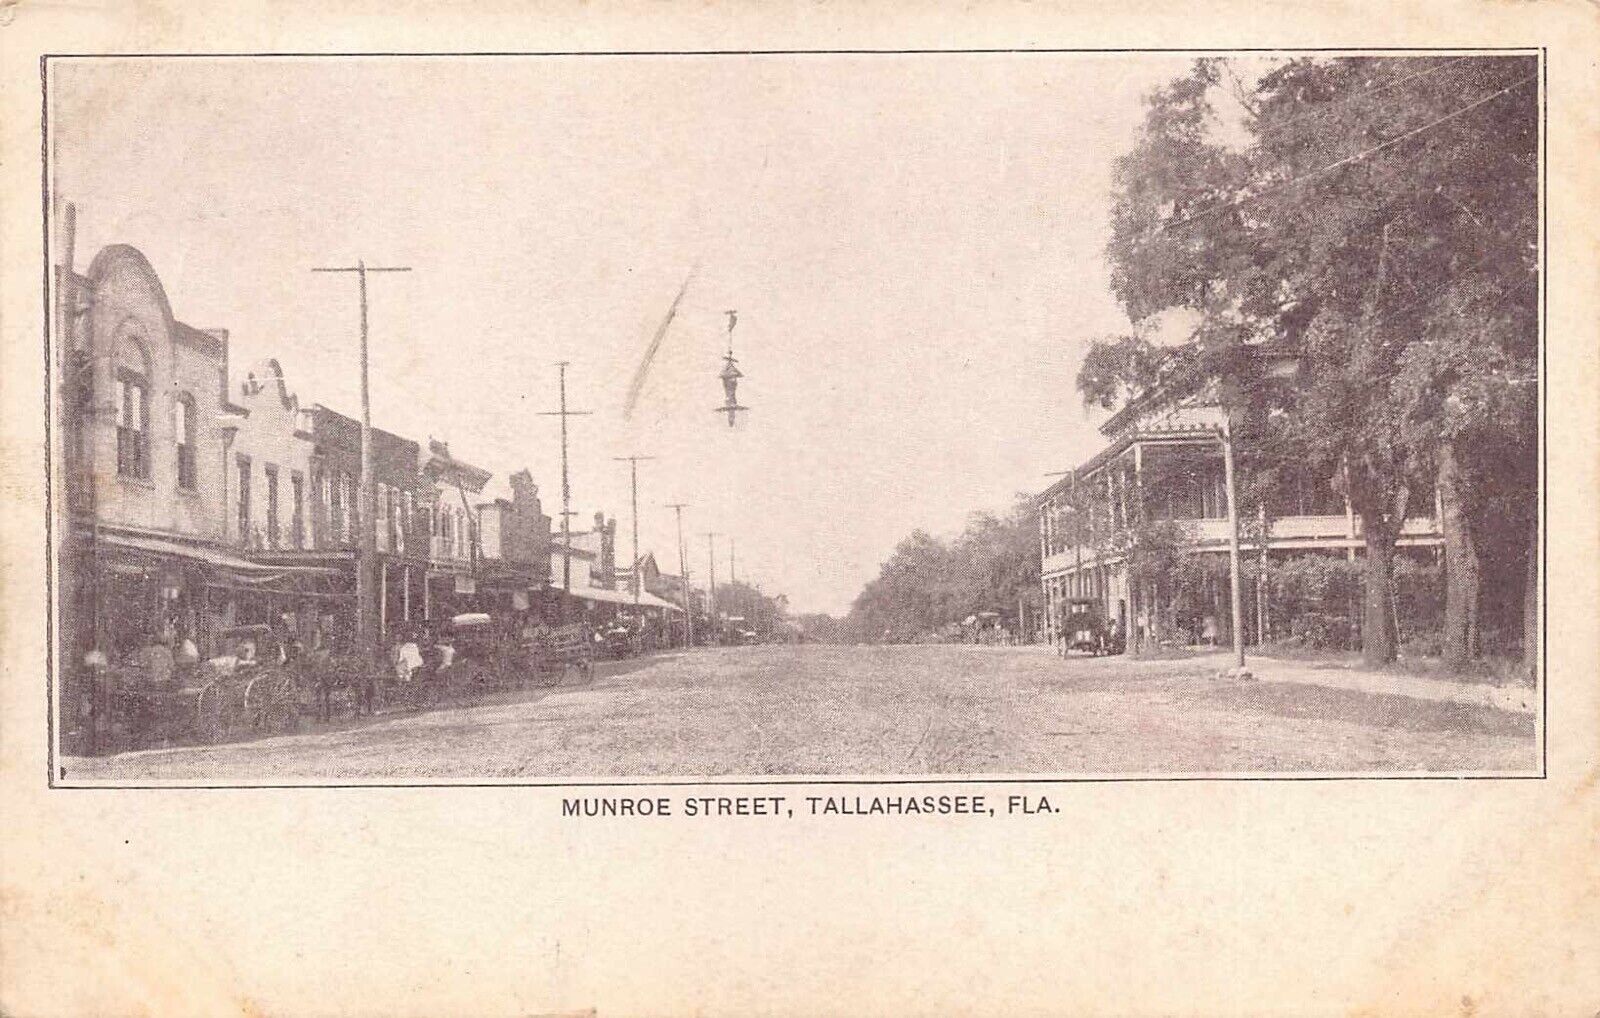 FL 1900’s VERY RARE EARLY VIEW Monroe Street at Tallahassee, FLA - LEON COUNTY